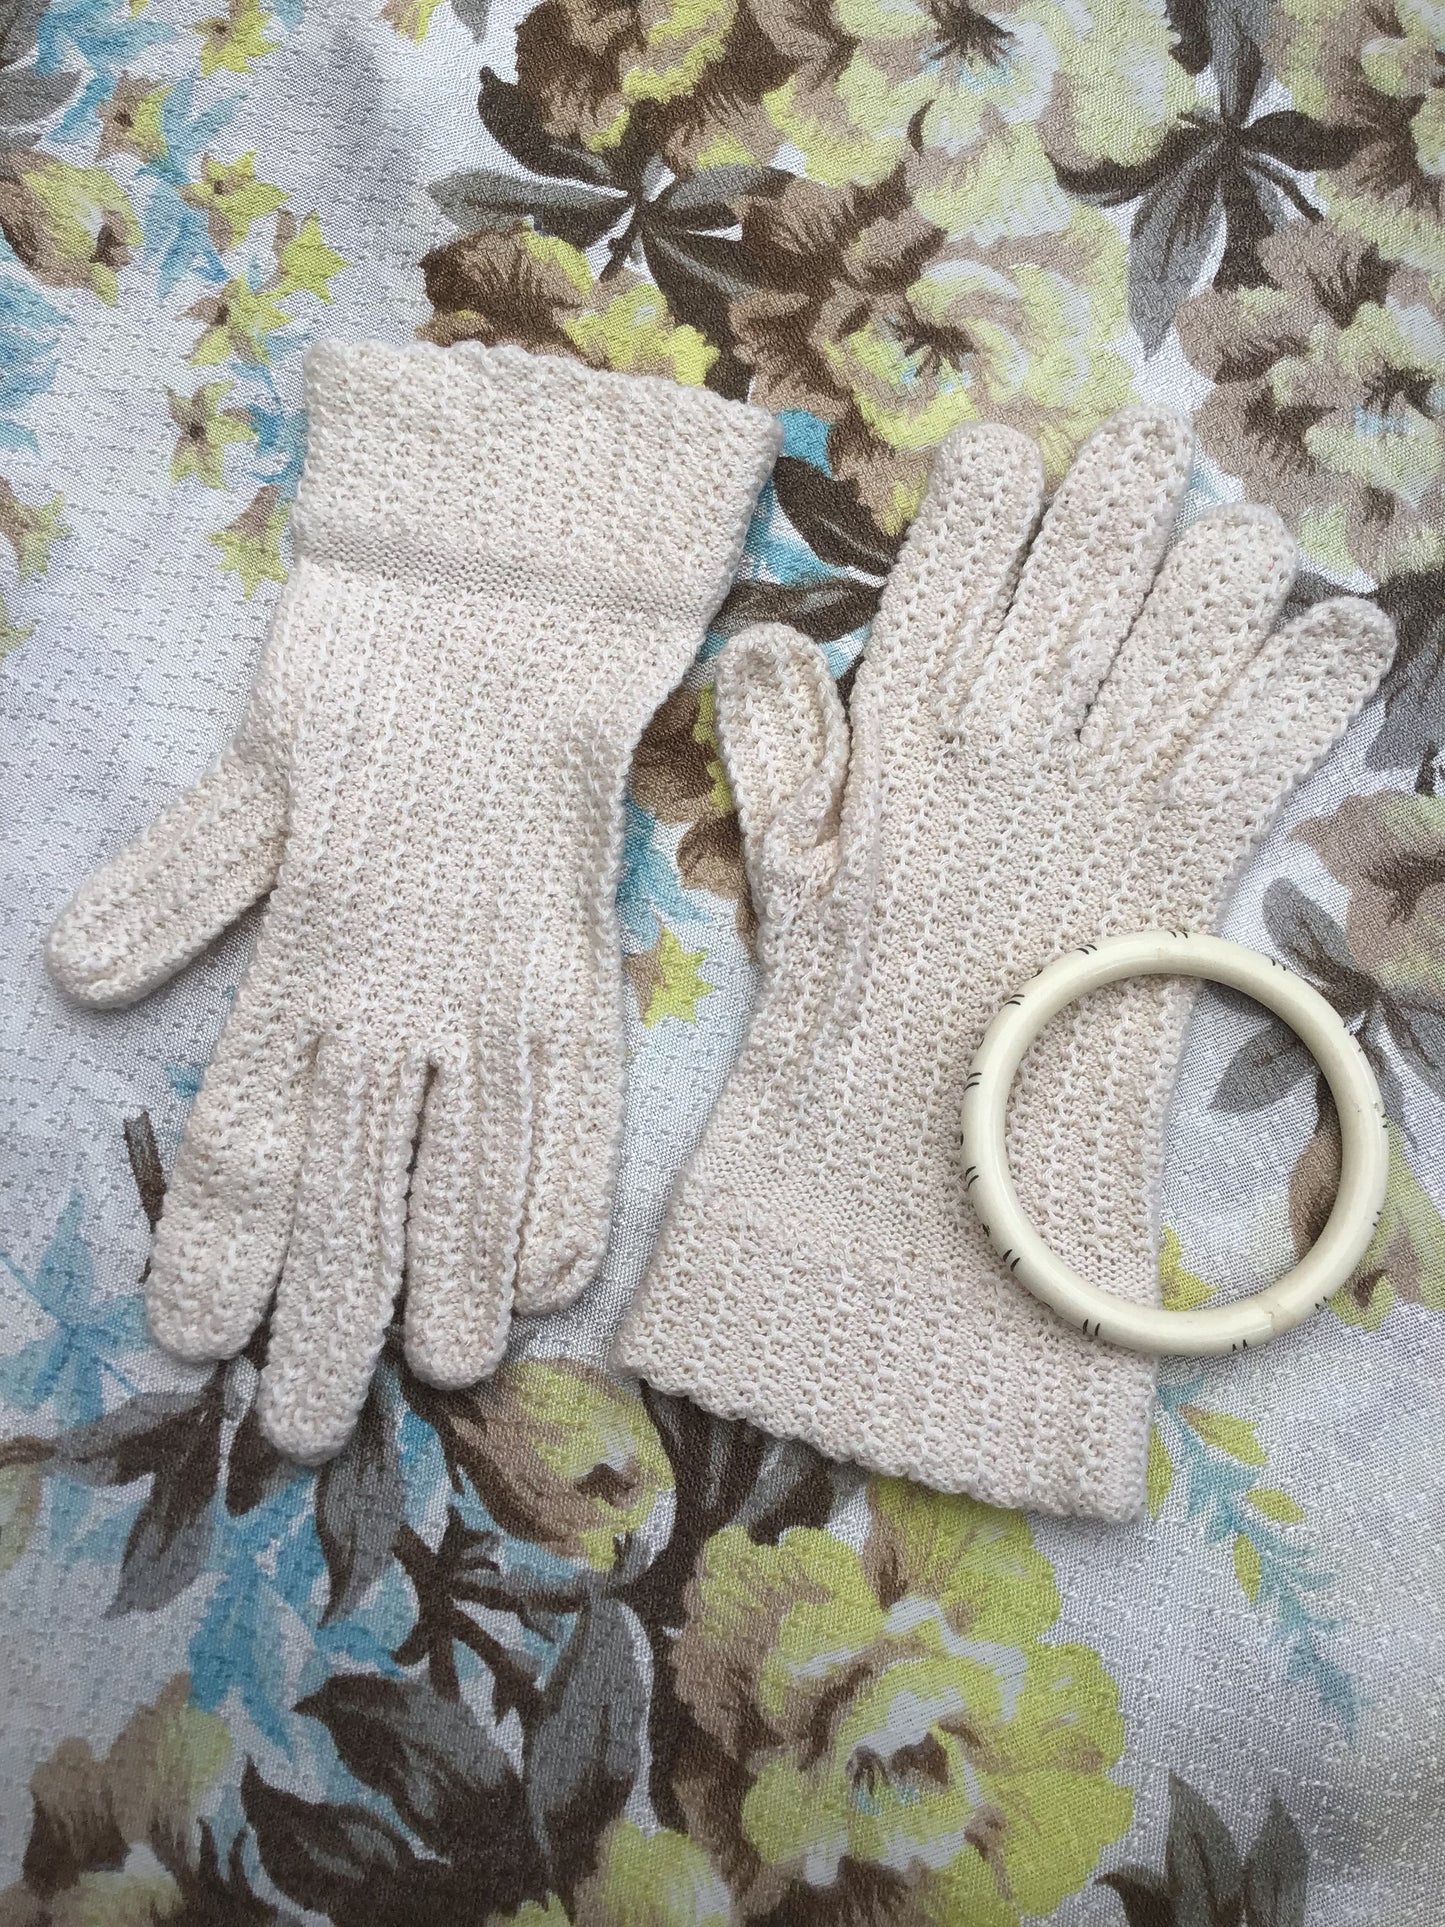 Edwardian revival vintage crochet knit lacey gloves, steampunk picnic to period costume wedding